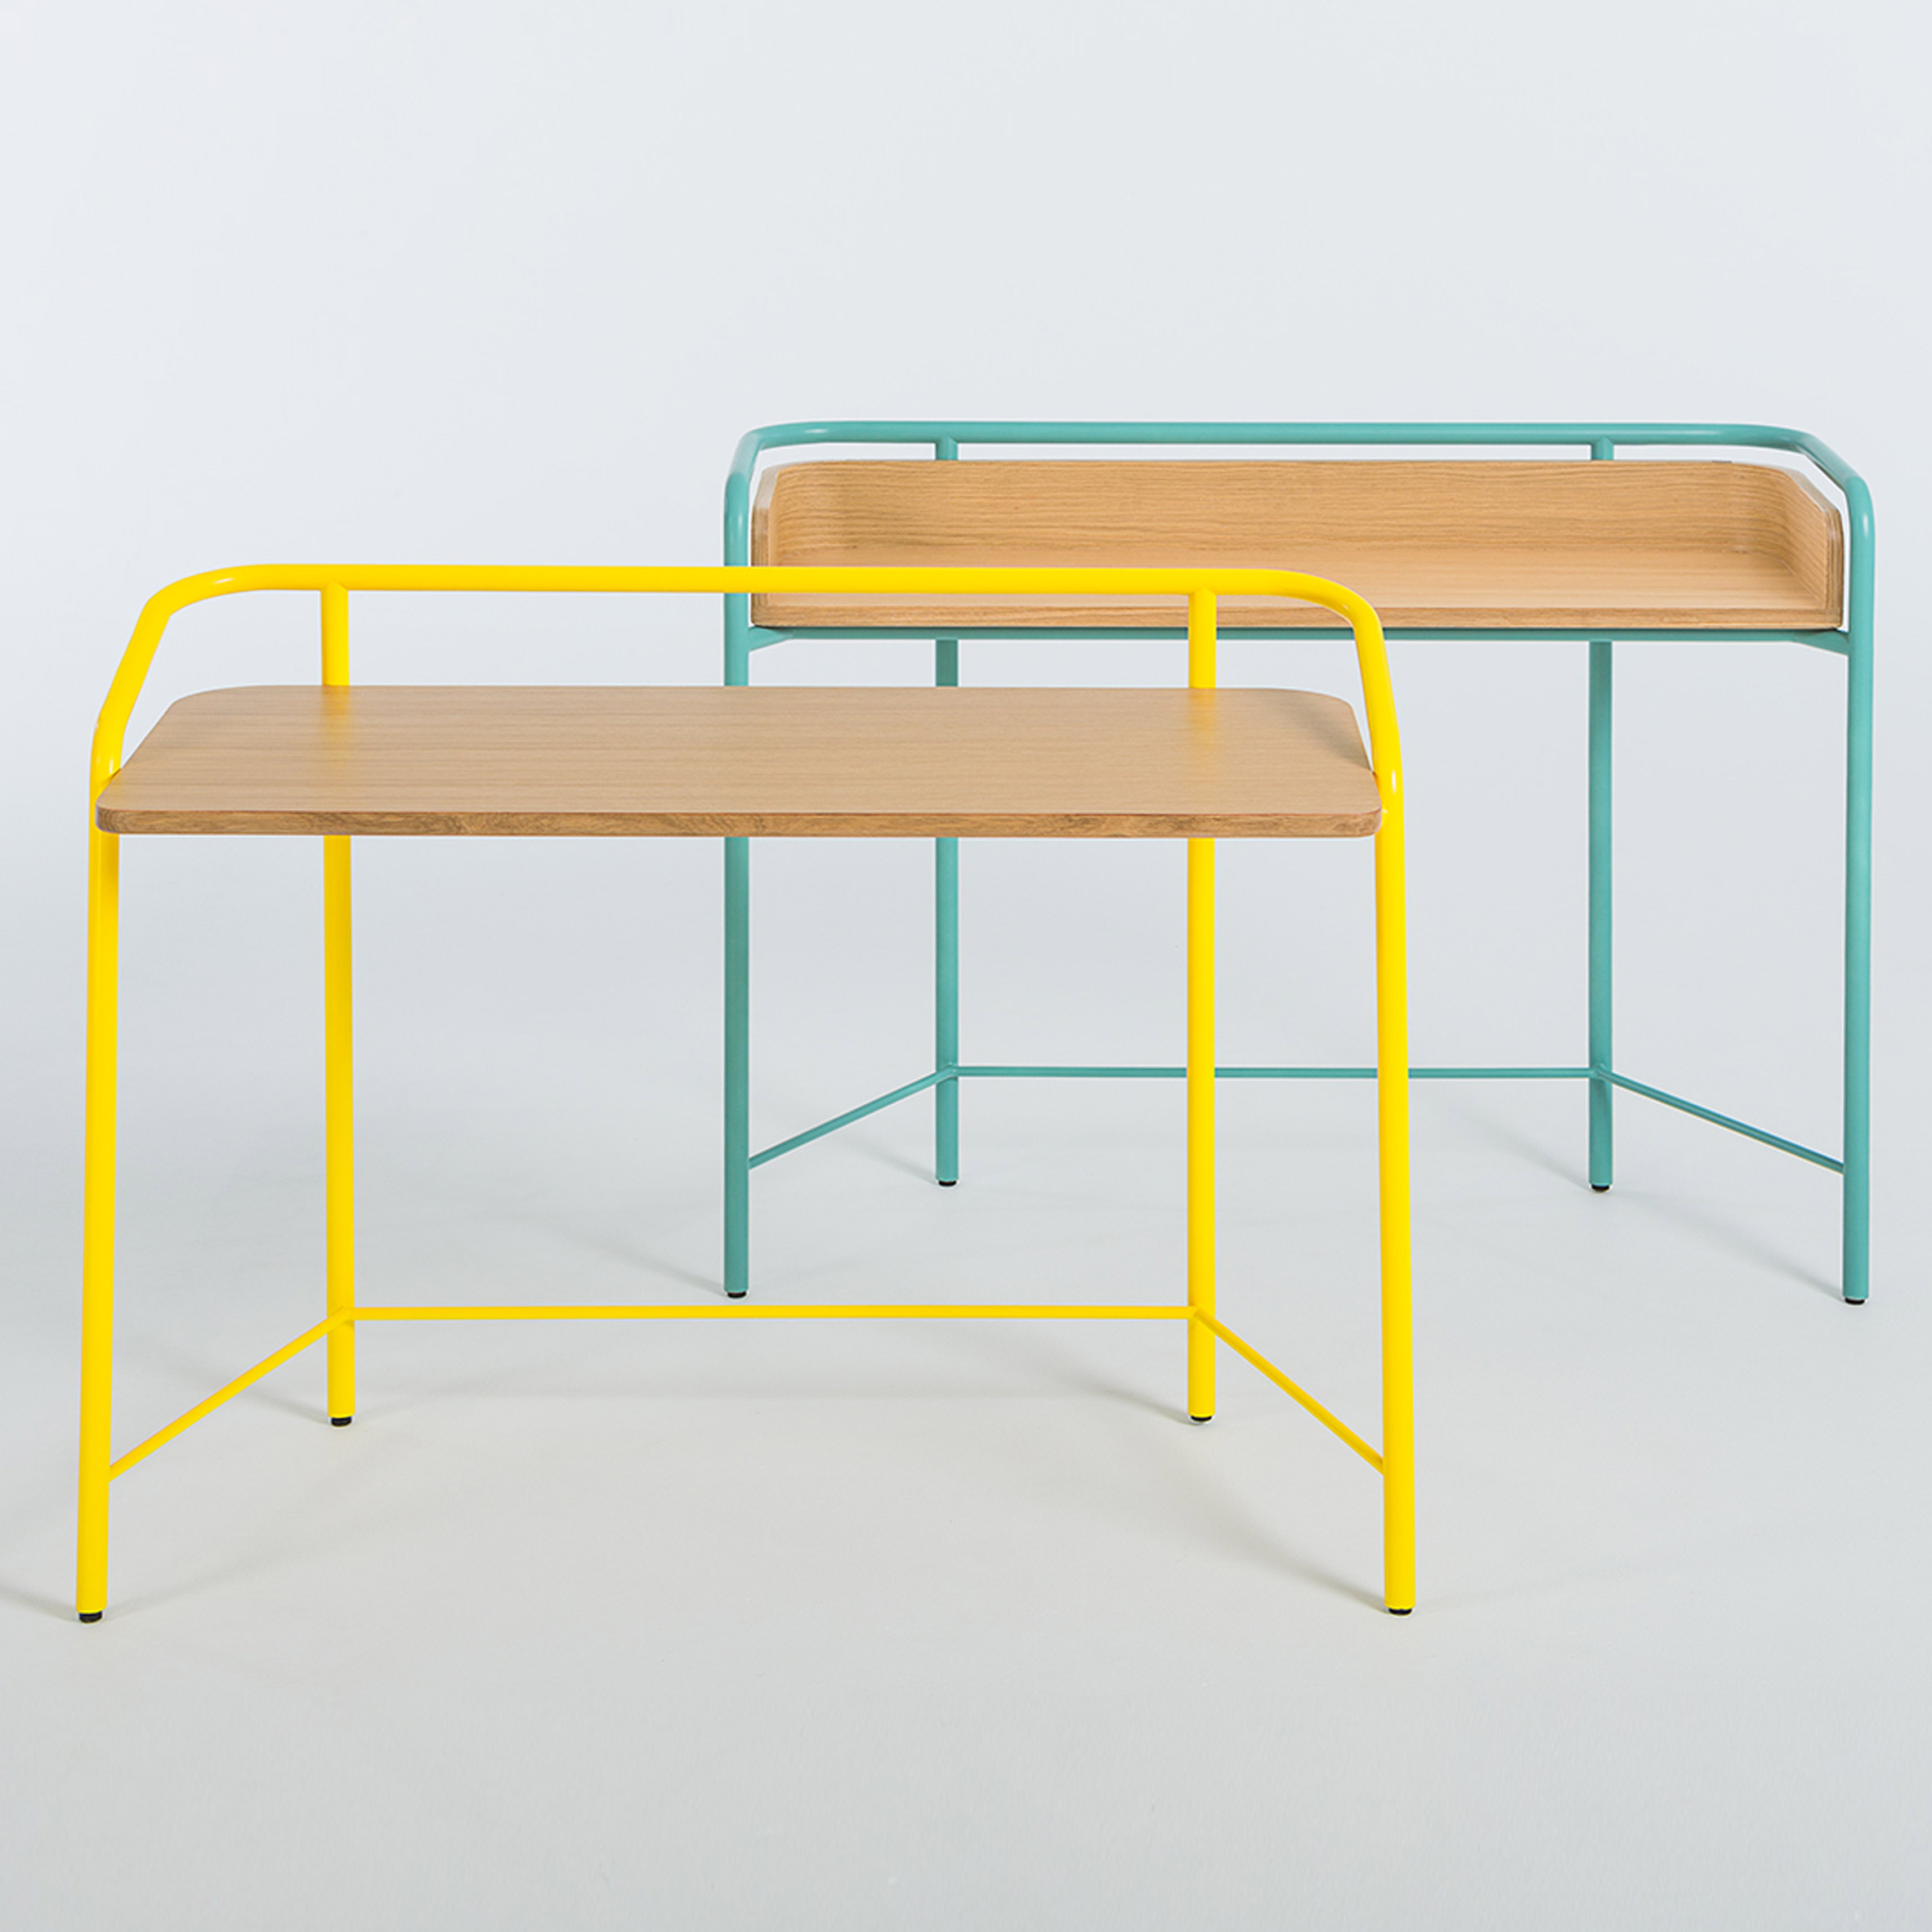 PLAYplay Collection 2 for Journey East by Lanzavecchia + Wai